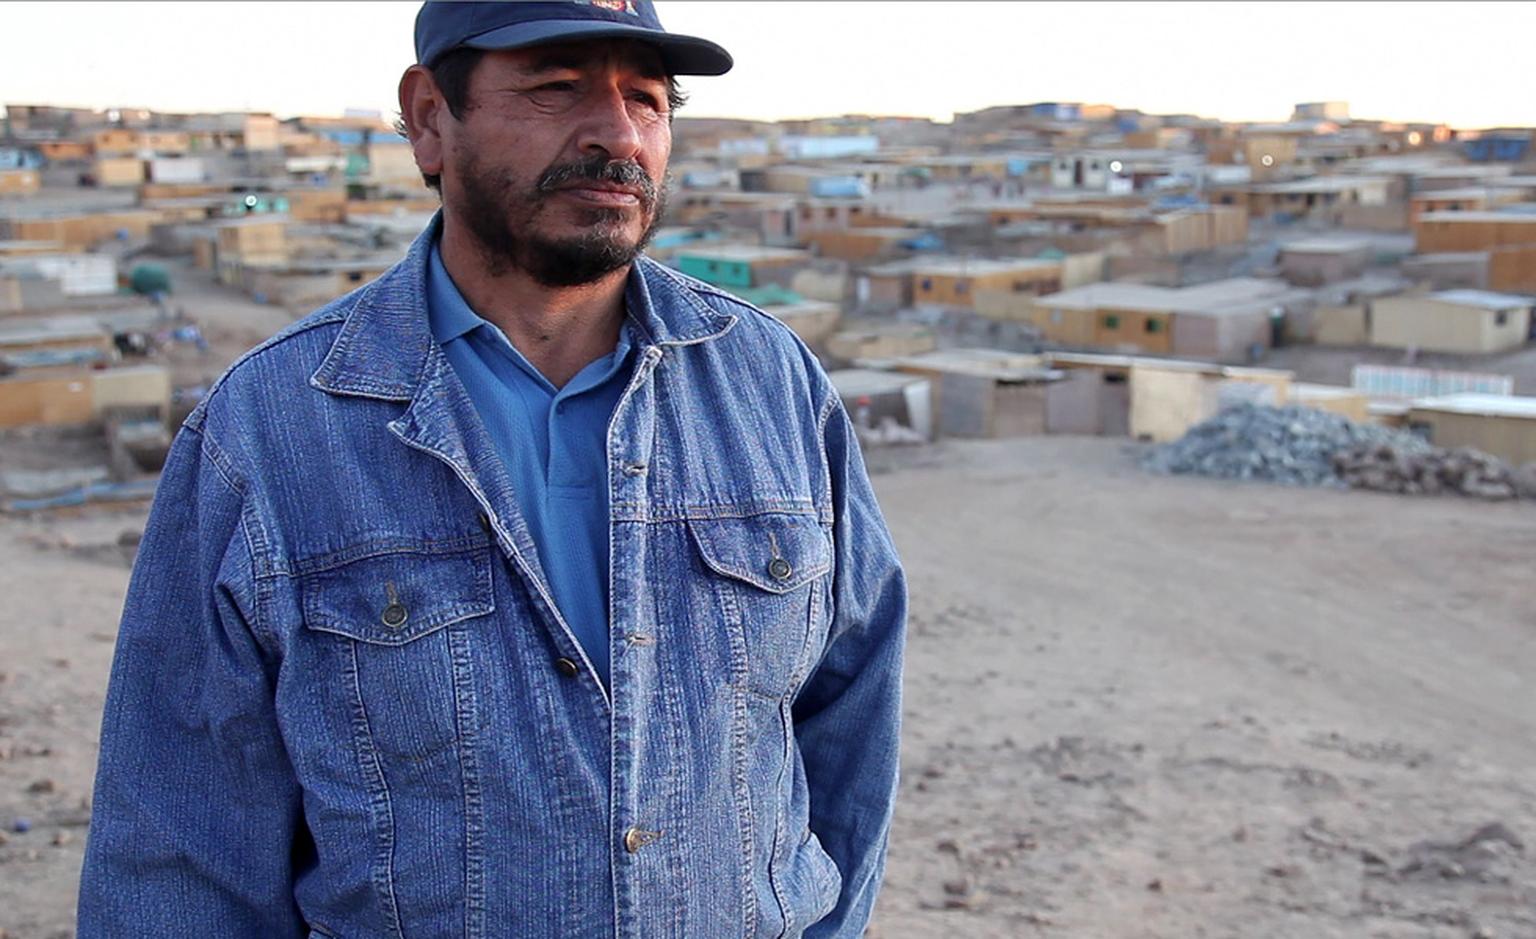 Manuel Reinoso Rivas, Vice-Chair of Alliance for Responsible Mining, from Peru has been an artisanal miner since 1993 and has been active in formalising the rights of small scale miners in his country and abroad.